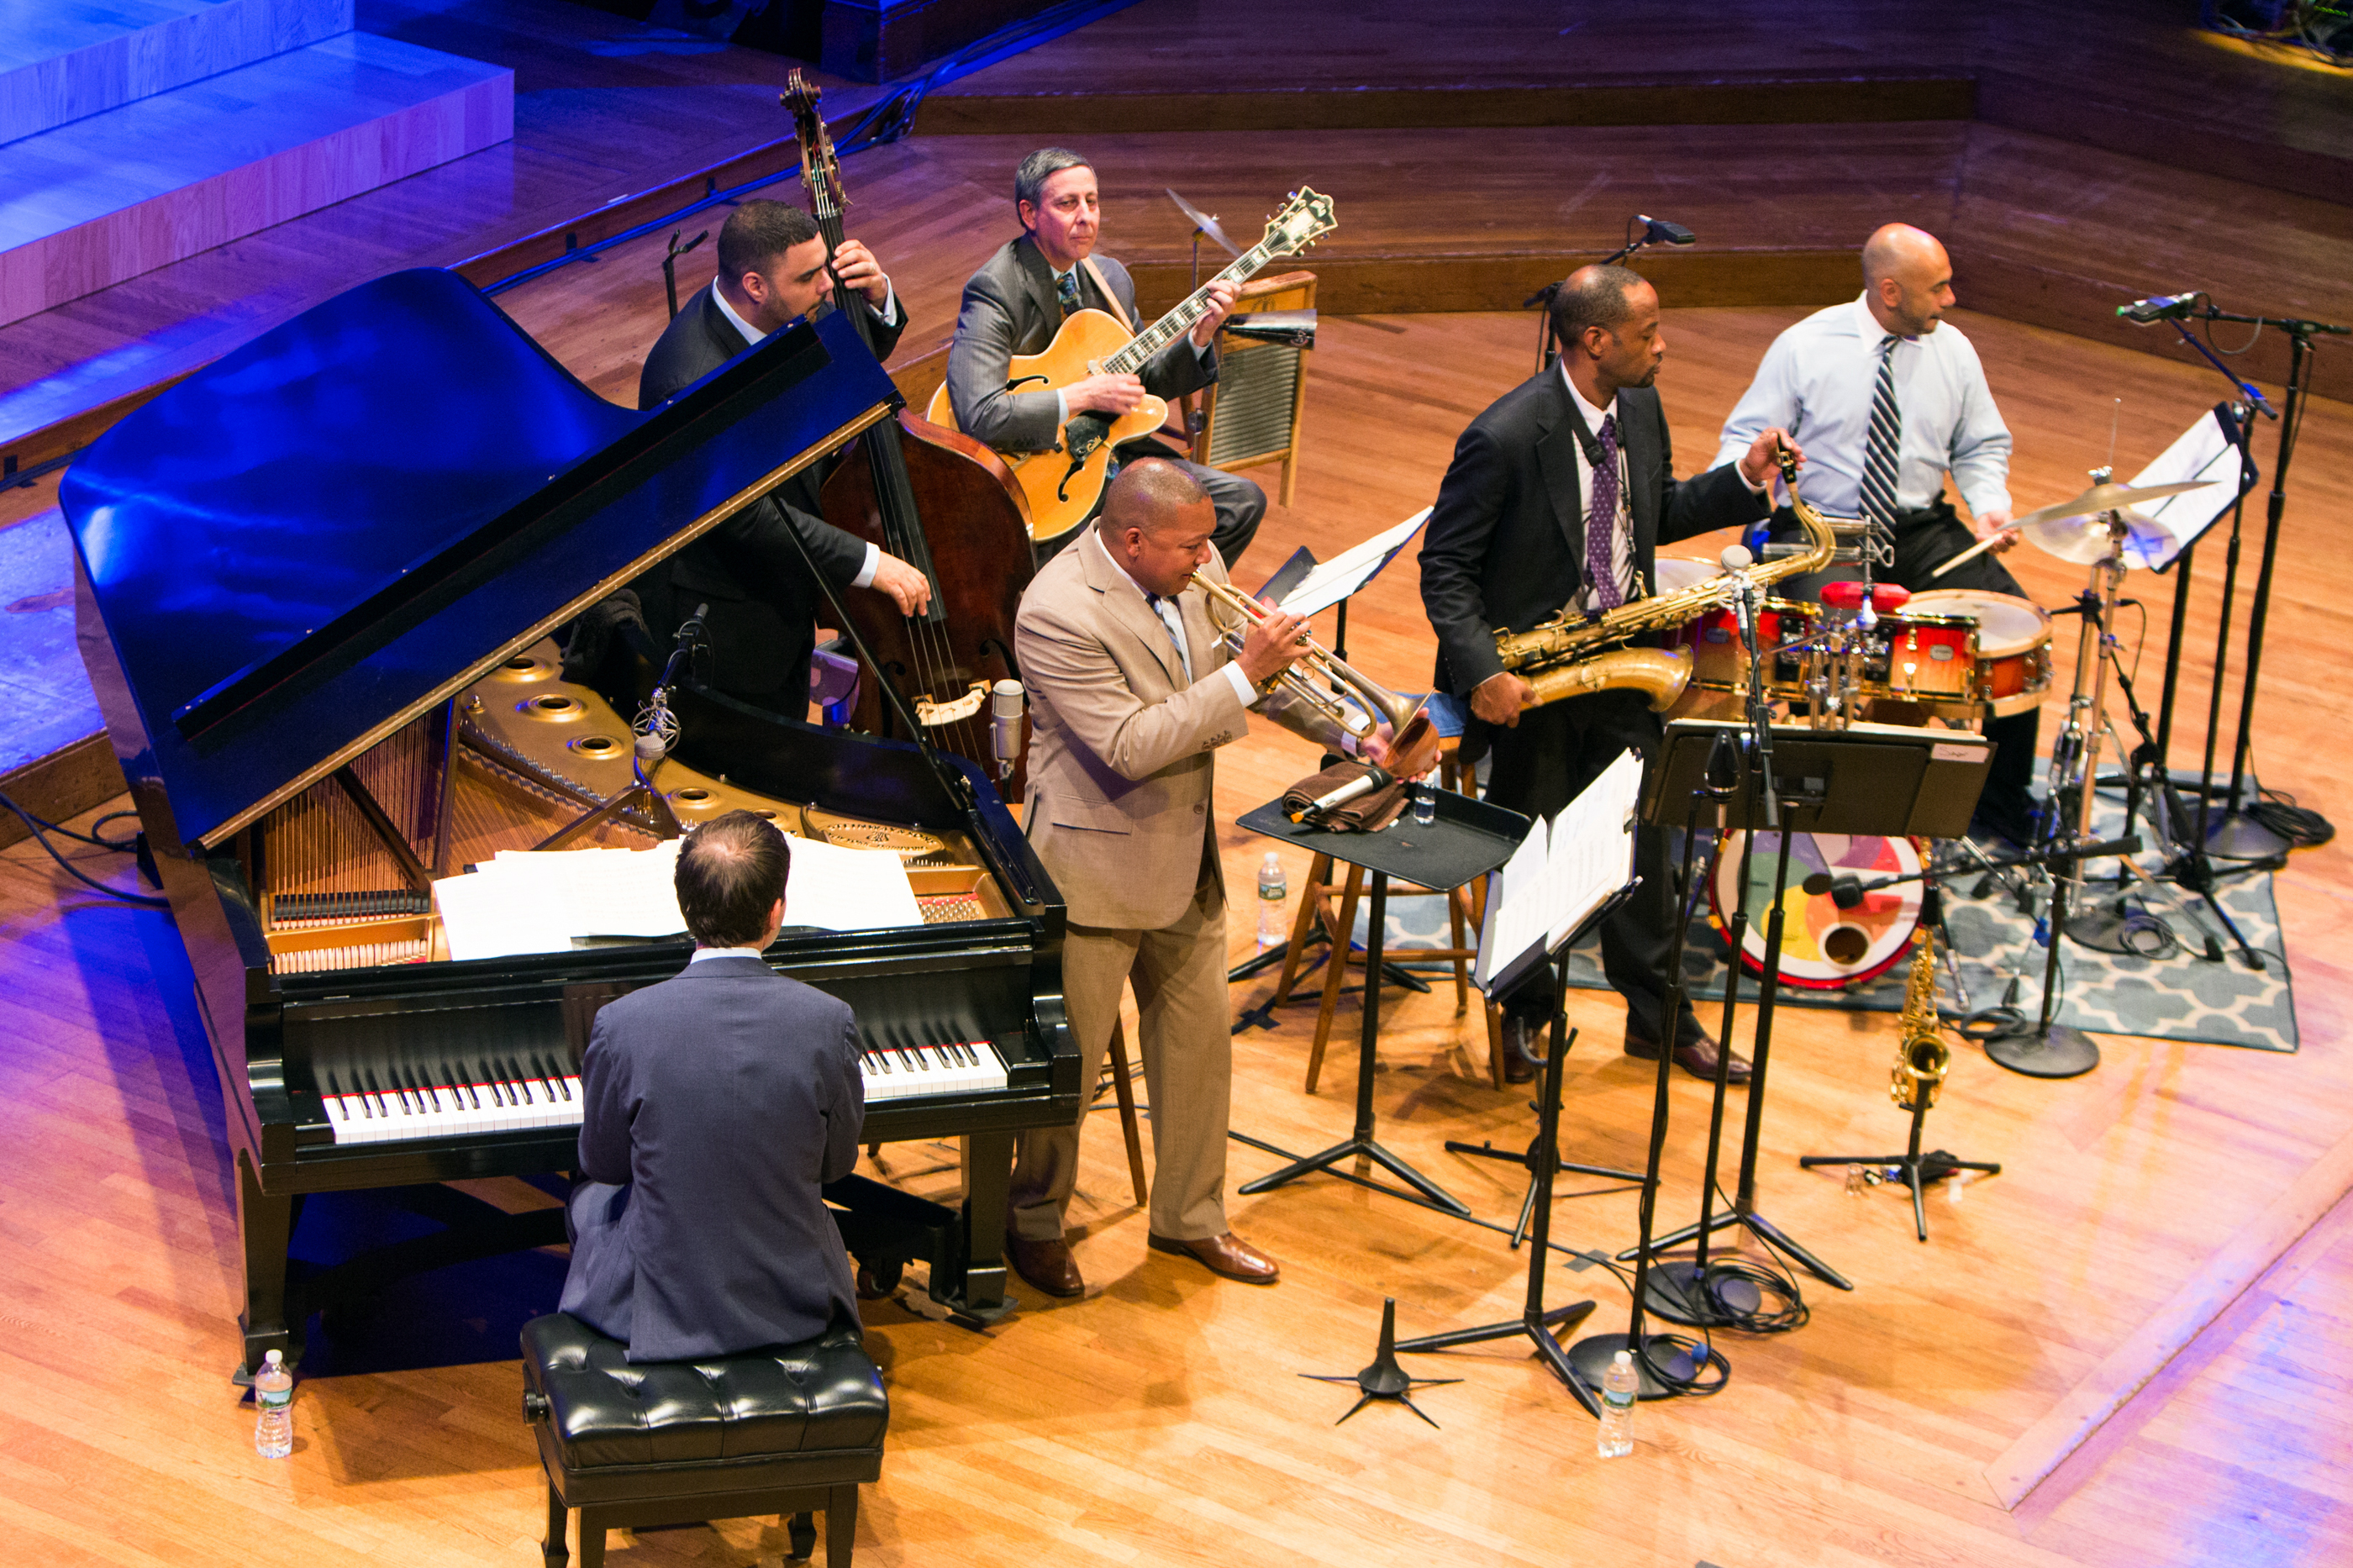 Pulitzer Prize-winning musician and composer Wynton Marsalis kicks off the Nieman Foundation’s Pulitzer Prize centennial weekend at Sanders Theatre, Sept. 10, 2016. Marsalis  made history in 1997 when his oratorio “Blood on the Fields” became the first jazz composition to win the Pulitzer Prize for Music. Performing with him are Walter Blanding, saxophone; James Chirillo, guitar; Ricky Gordon, percussion (not pictured); Carlos Henriquez, bass; Ali Jackson, drums; and Dan Nimmer, piano.   